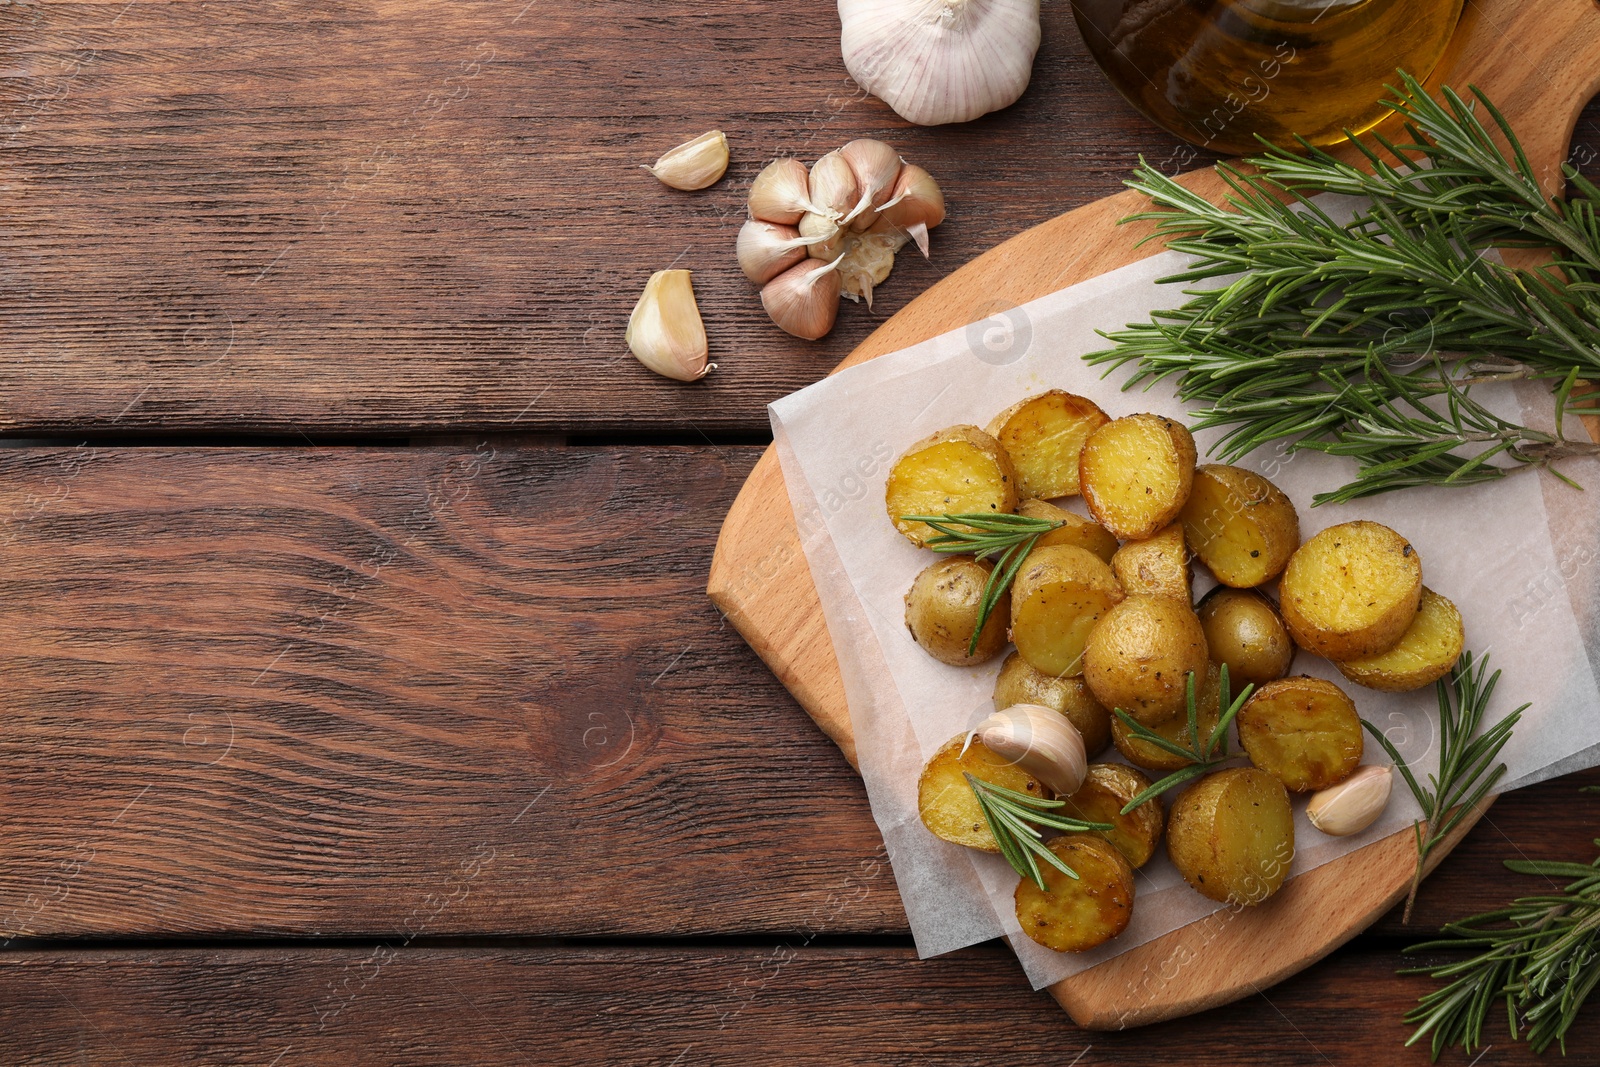 Photo of Delicious baked potatoes with rosemary and garlic on wooden table, flat lay. Space for text